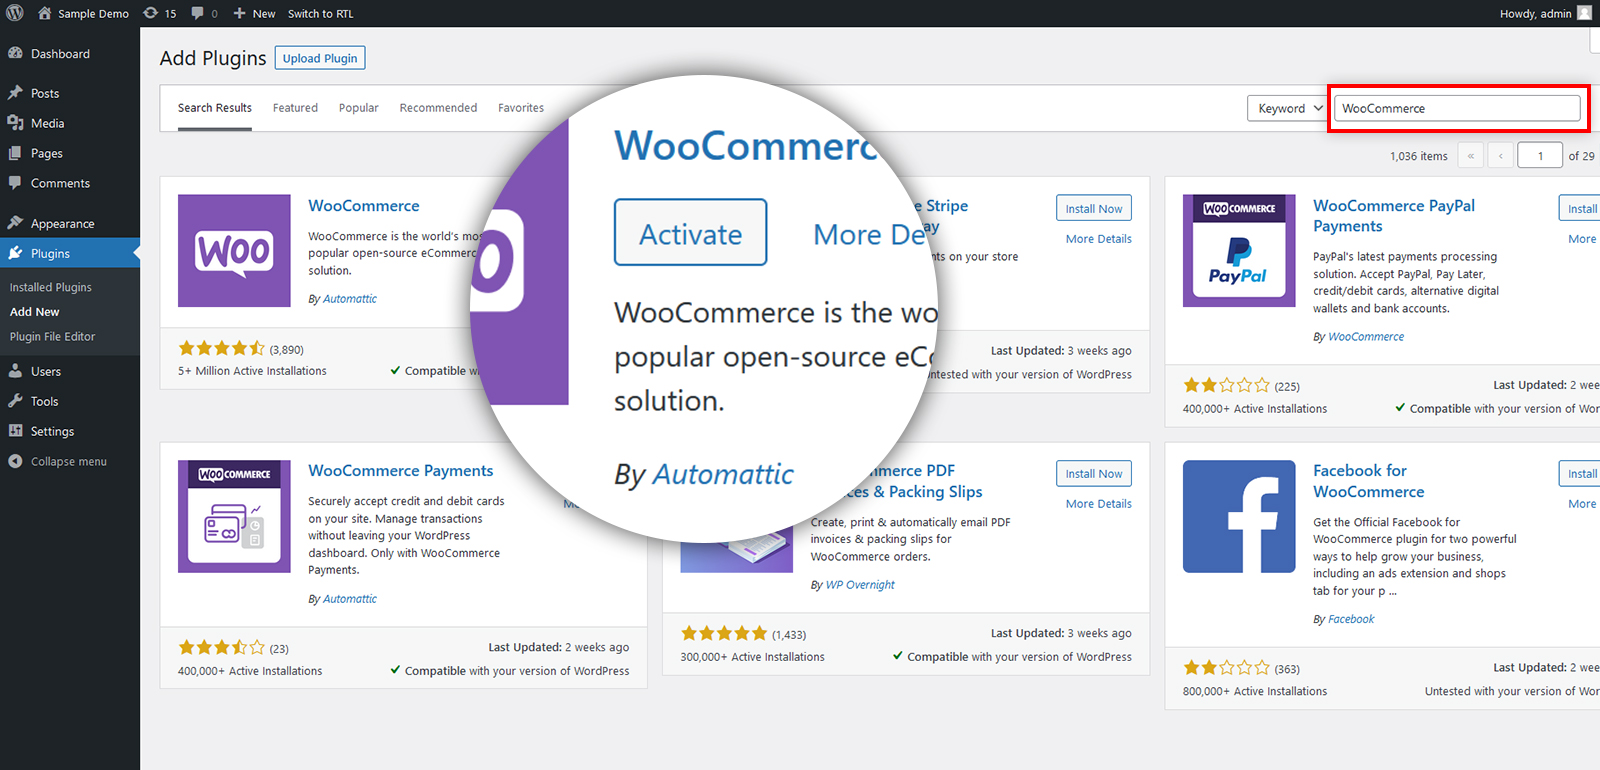 A Guide On How To Install WooCommerce On Your WordPress Website